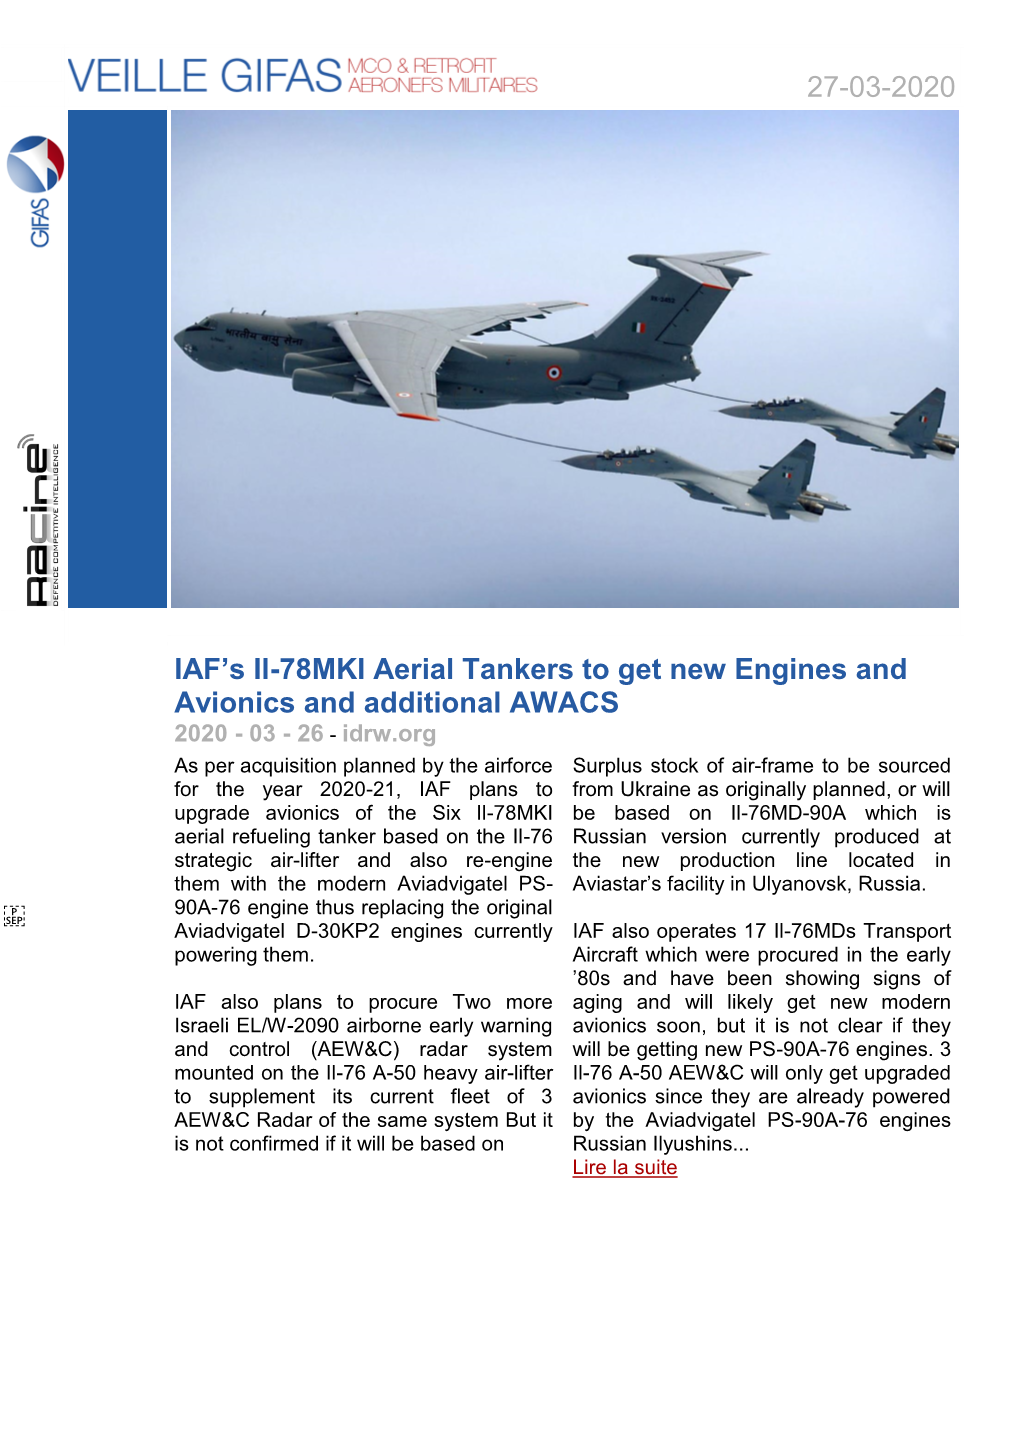 27-03-2020 IAF's Il-78MKI Aerial Tankers to Get New Engines And